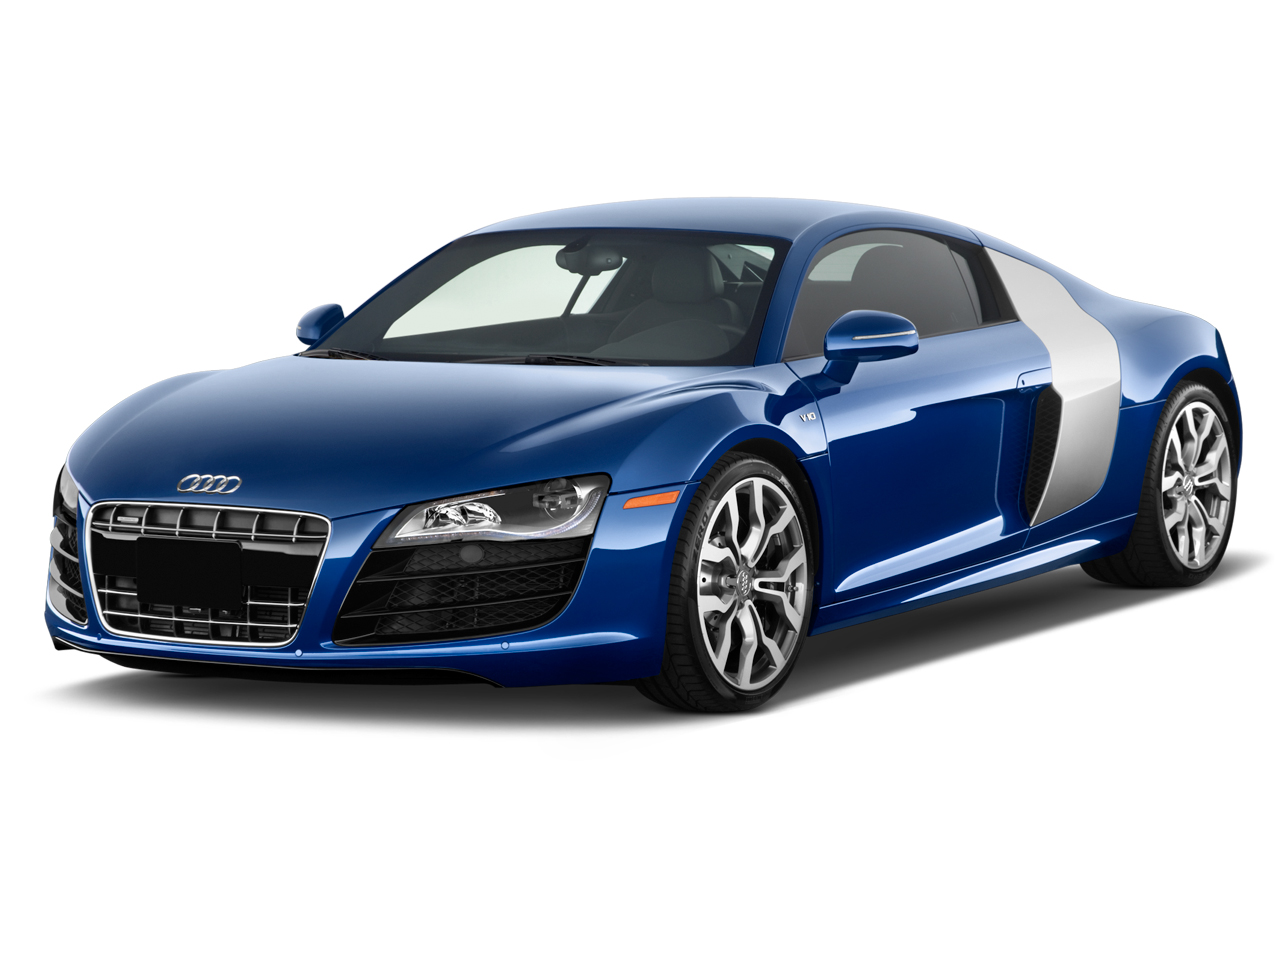 2011 Audi R8 Review, Ratings, Specs, Prices, and Photos - The Car Connection